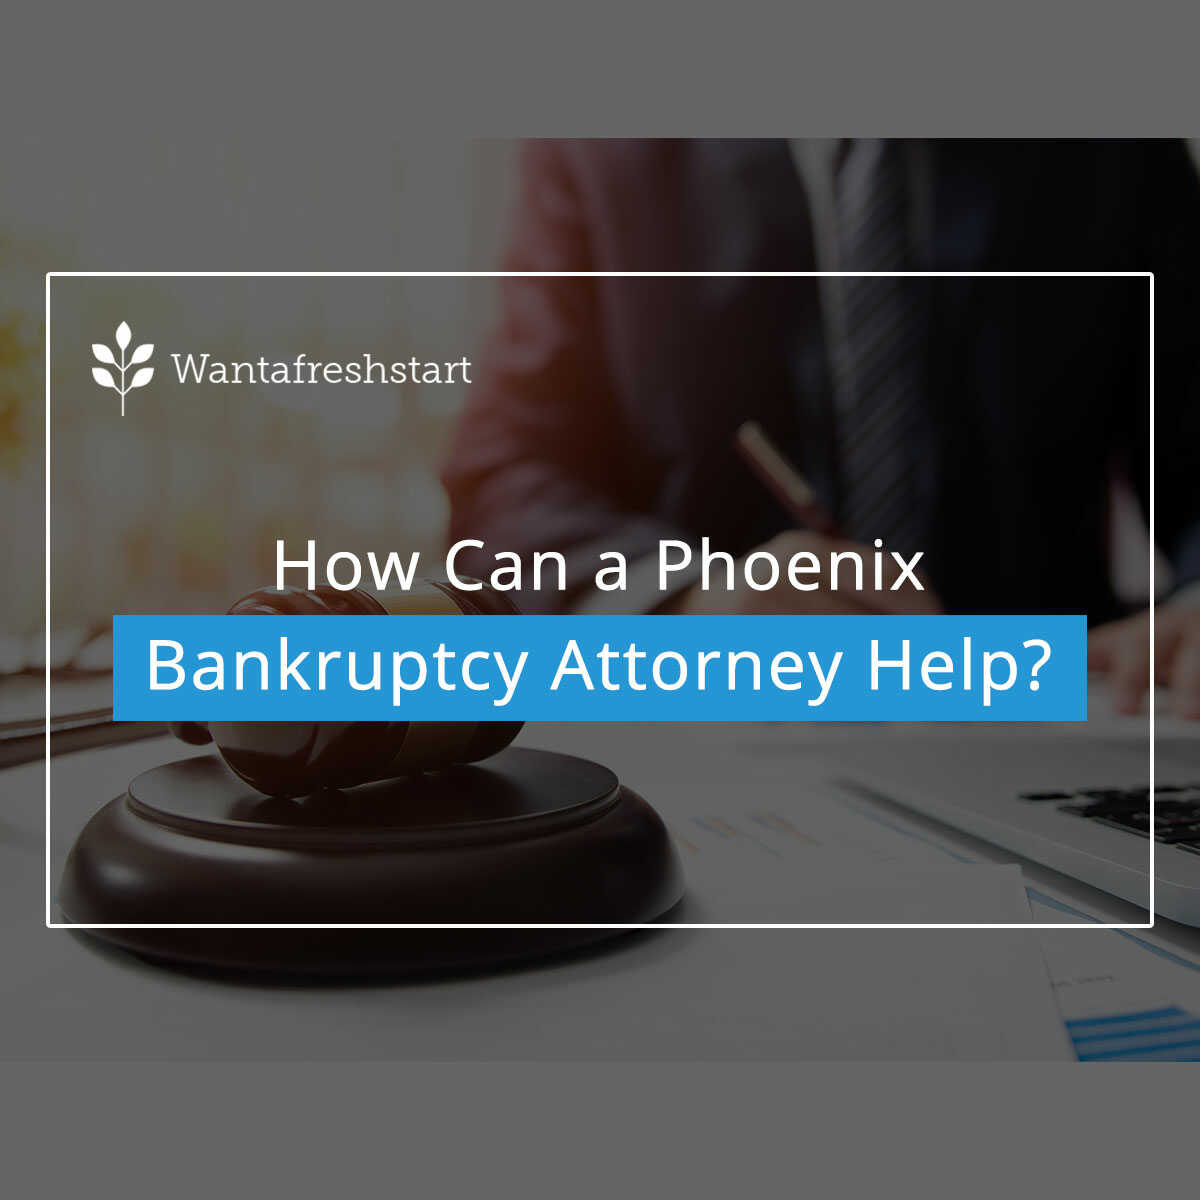 How Can a Phoenix Bankruptcy Attorney Help?